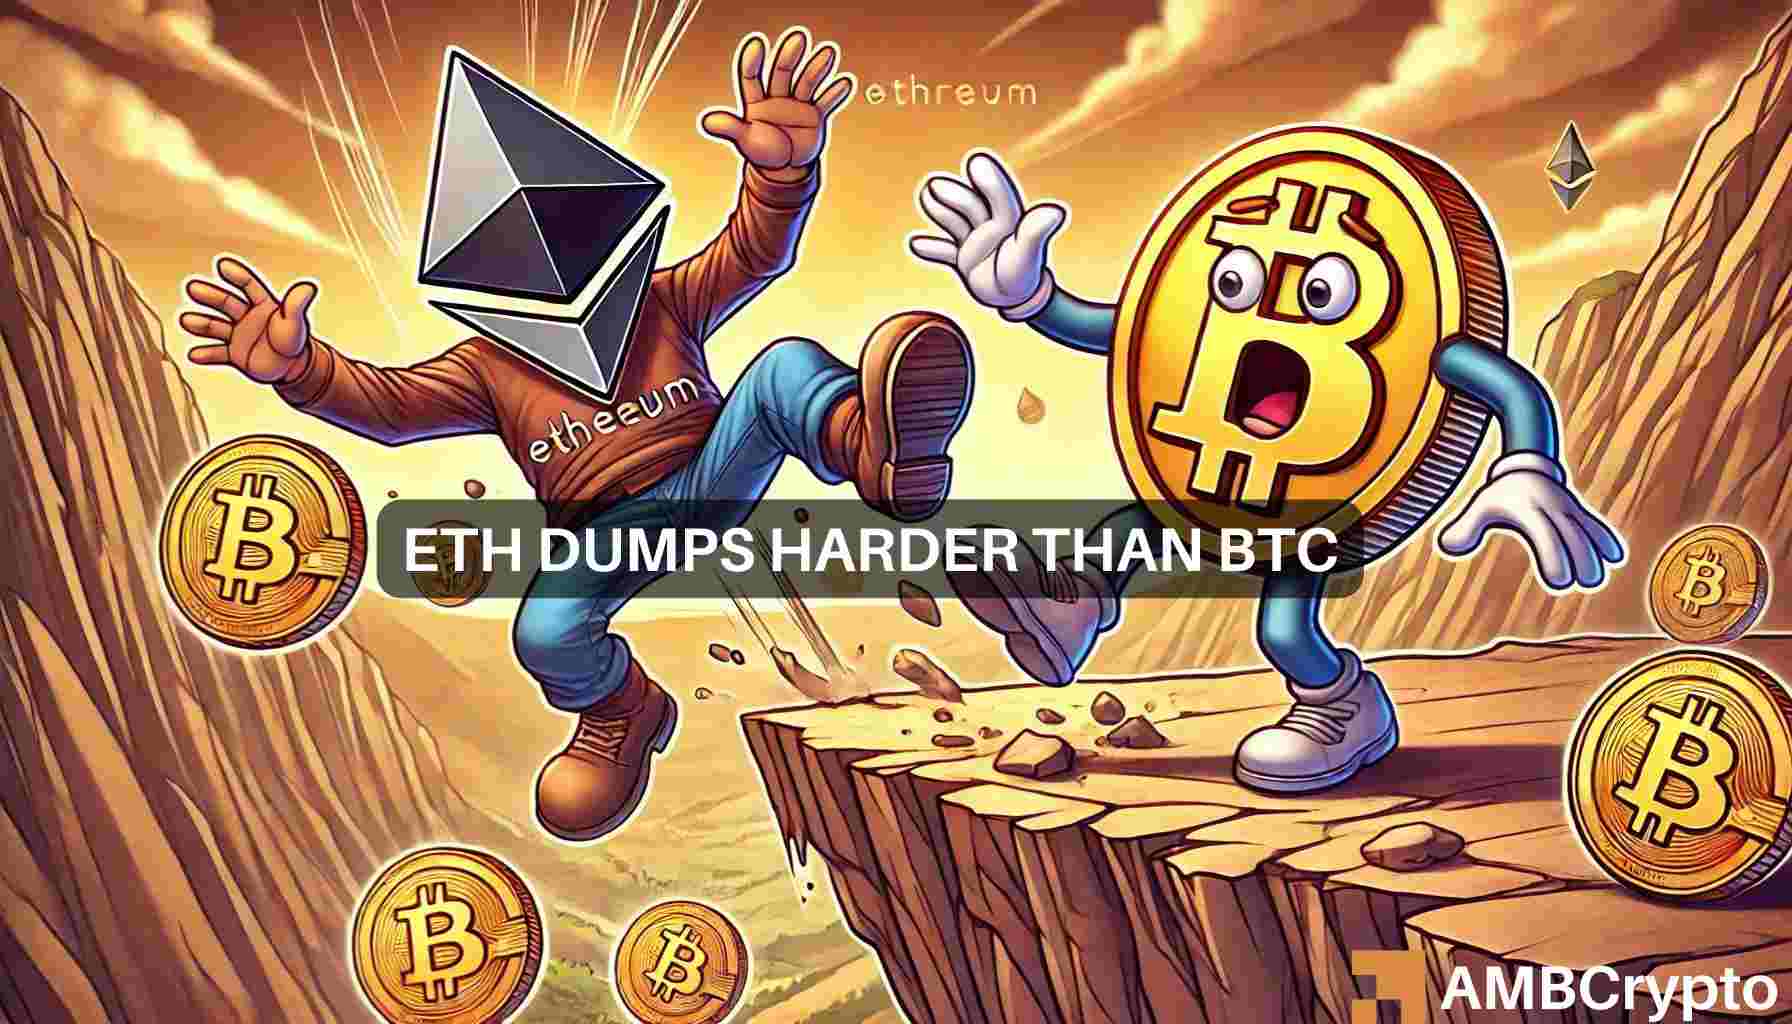 Ethereum investors adopt risk-off approach as ETH plunges. Will ETF launch offer market relief?